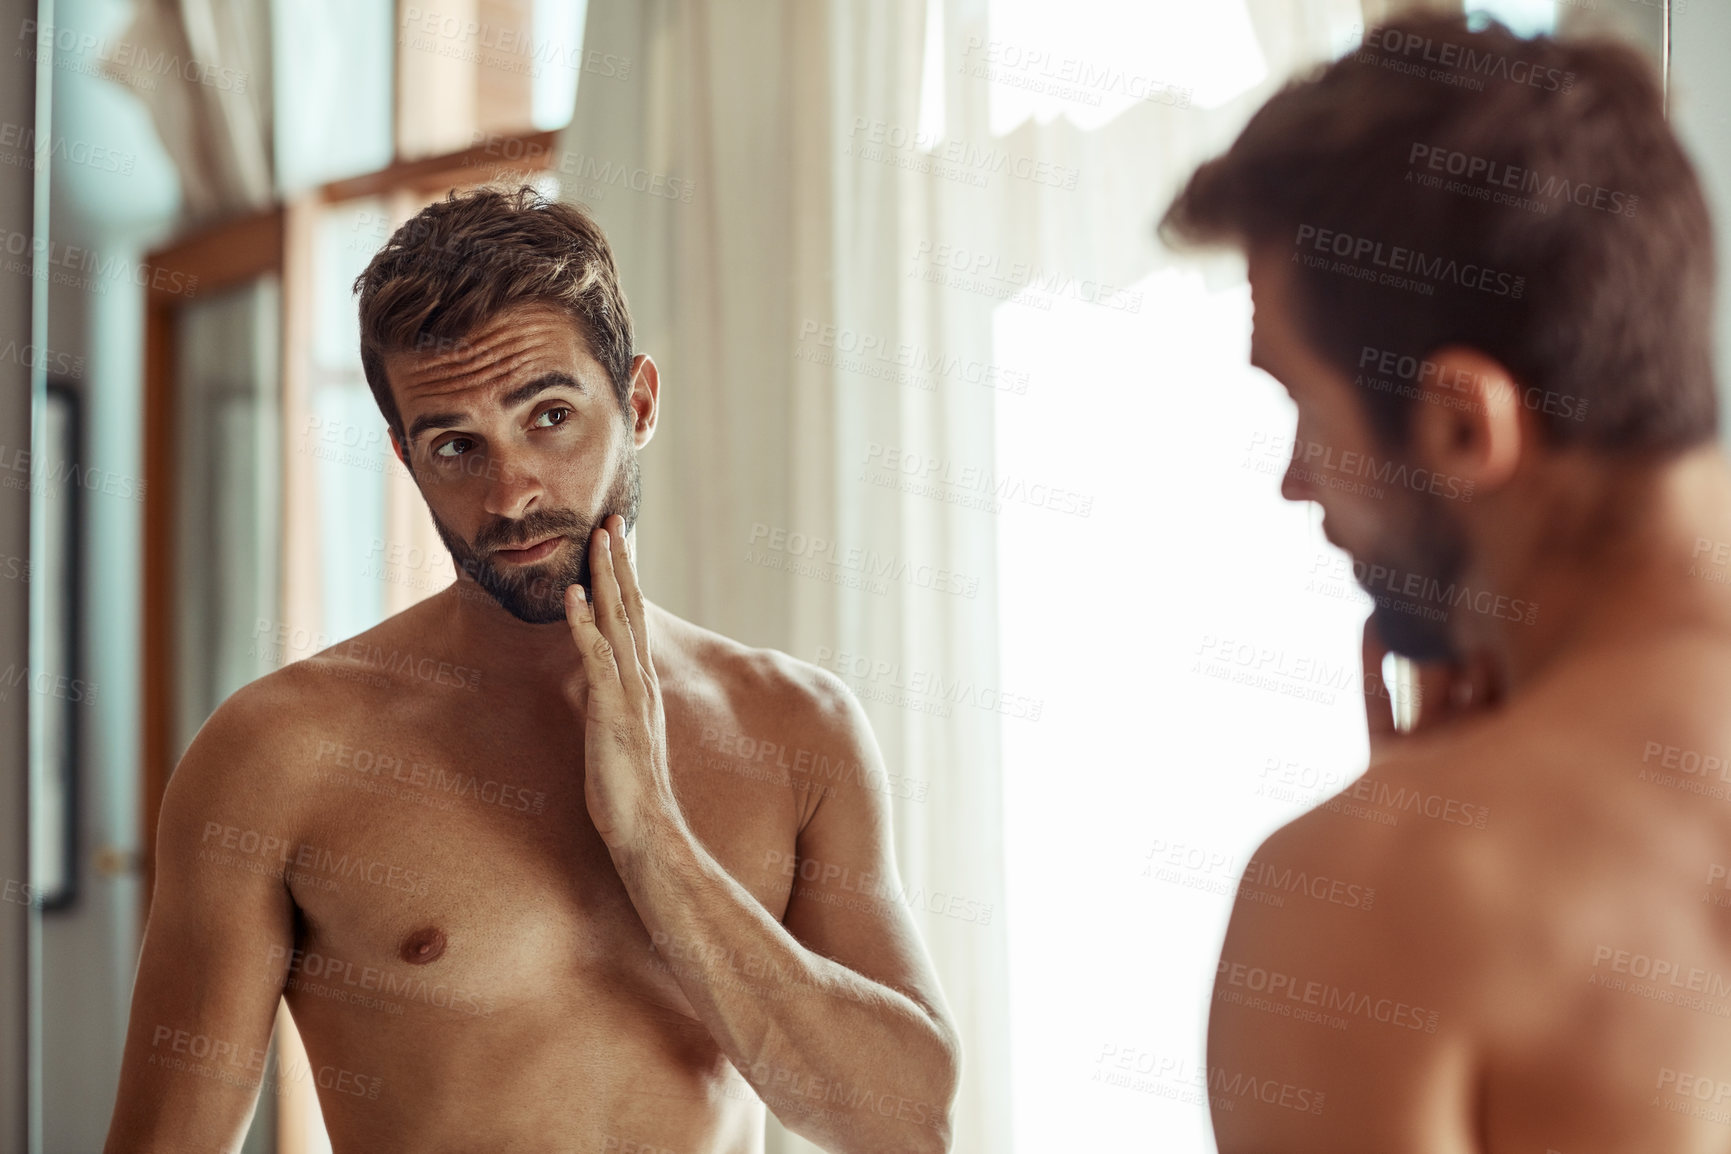 Buy stock photo Shot of a shirtless man checking out his skin in the bathroom mirror